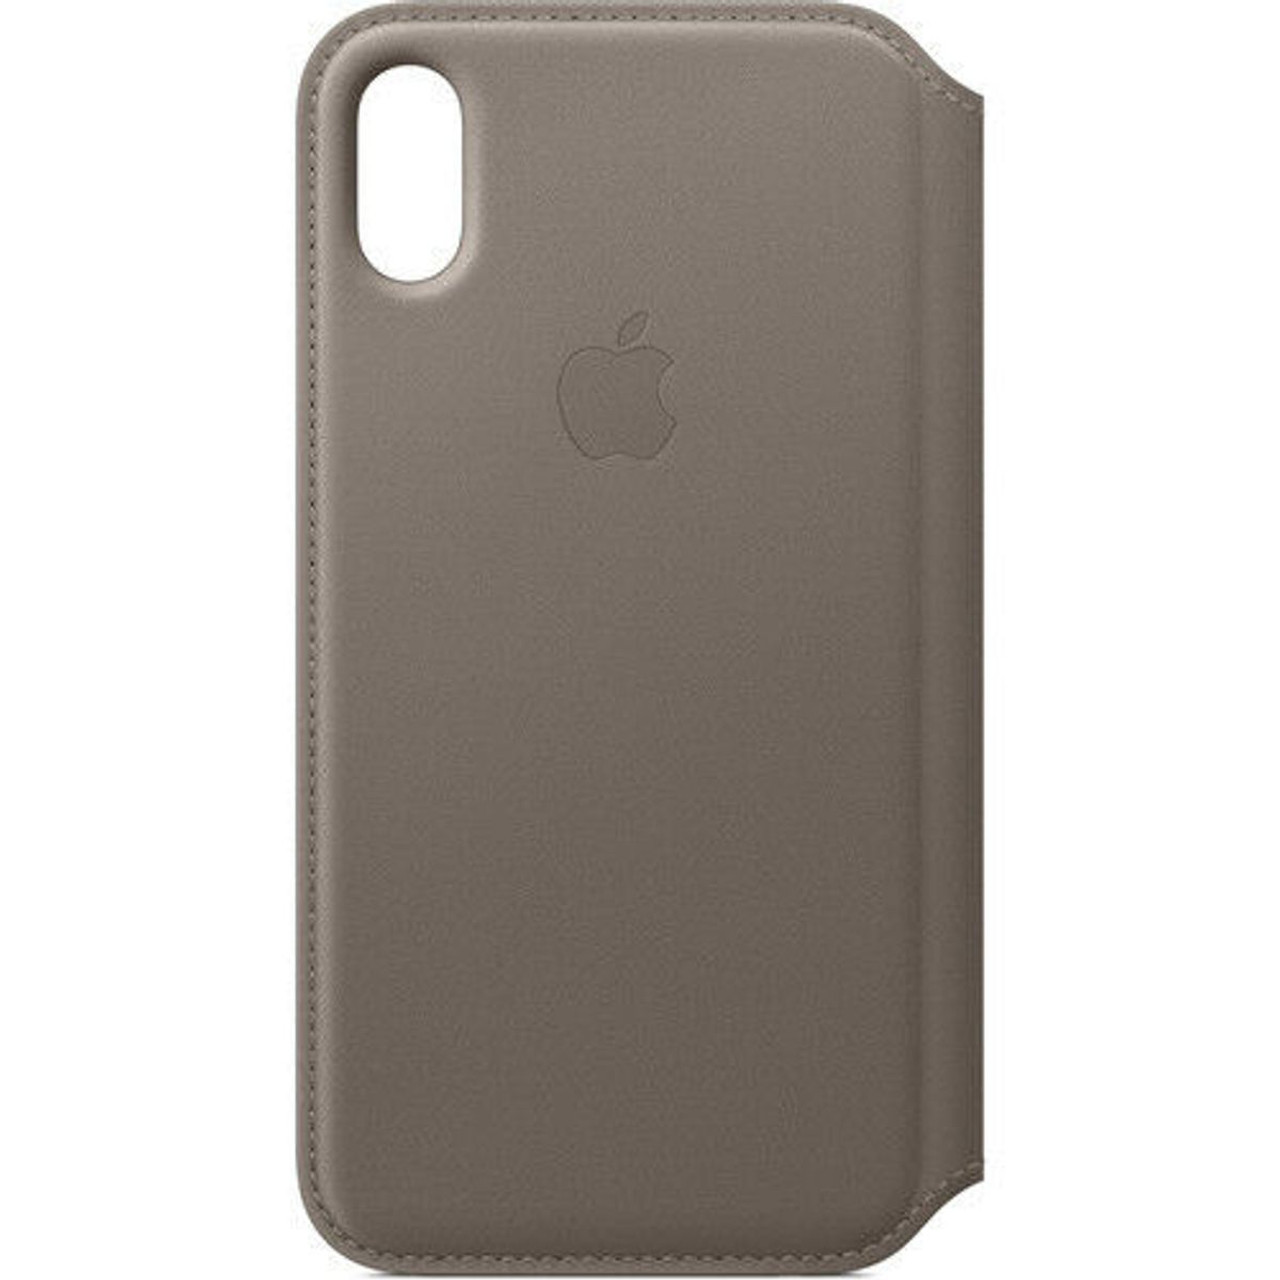 Apple Leather Folio for iPhone X product image